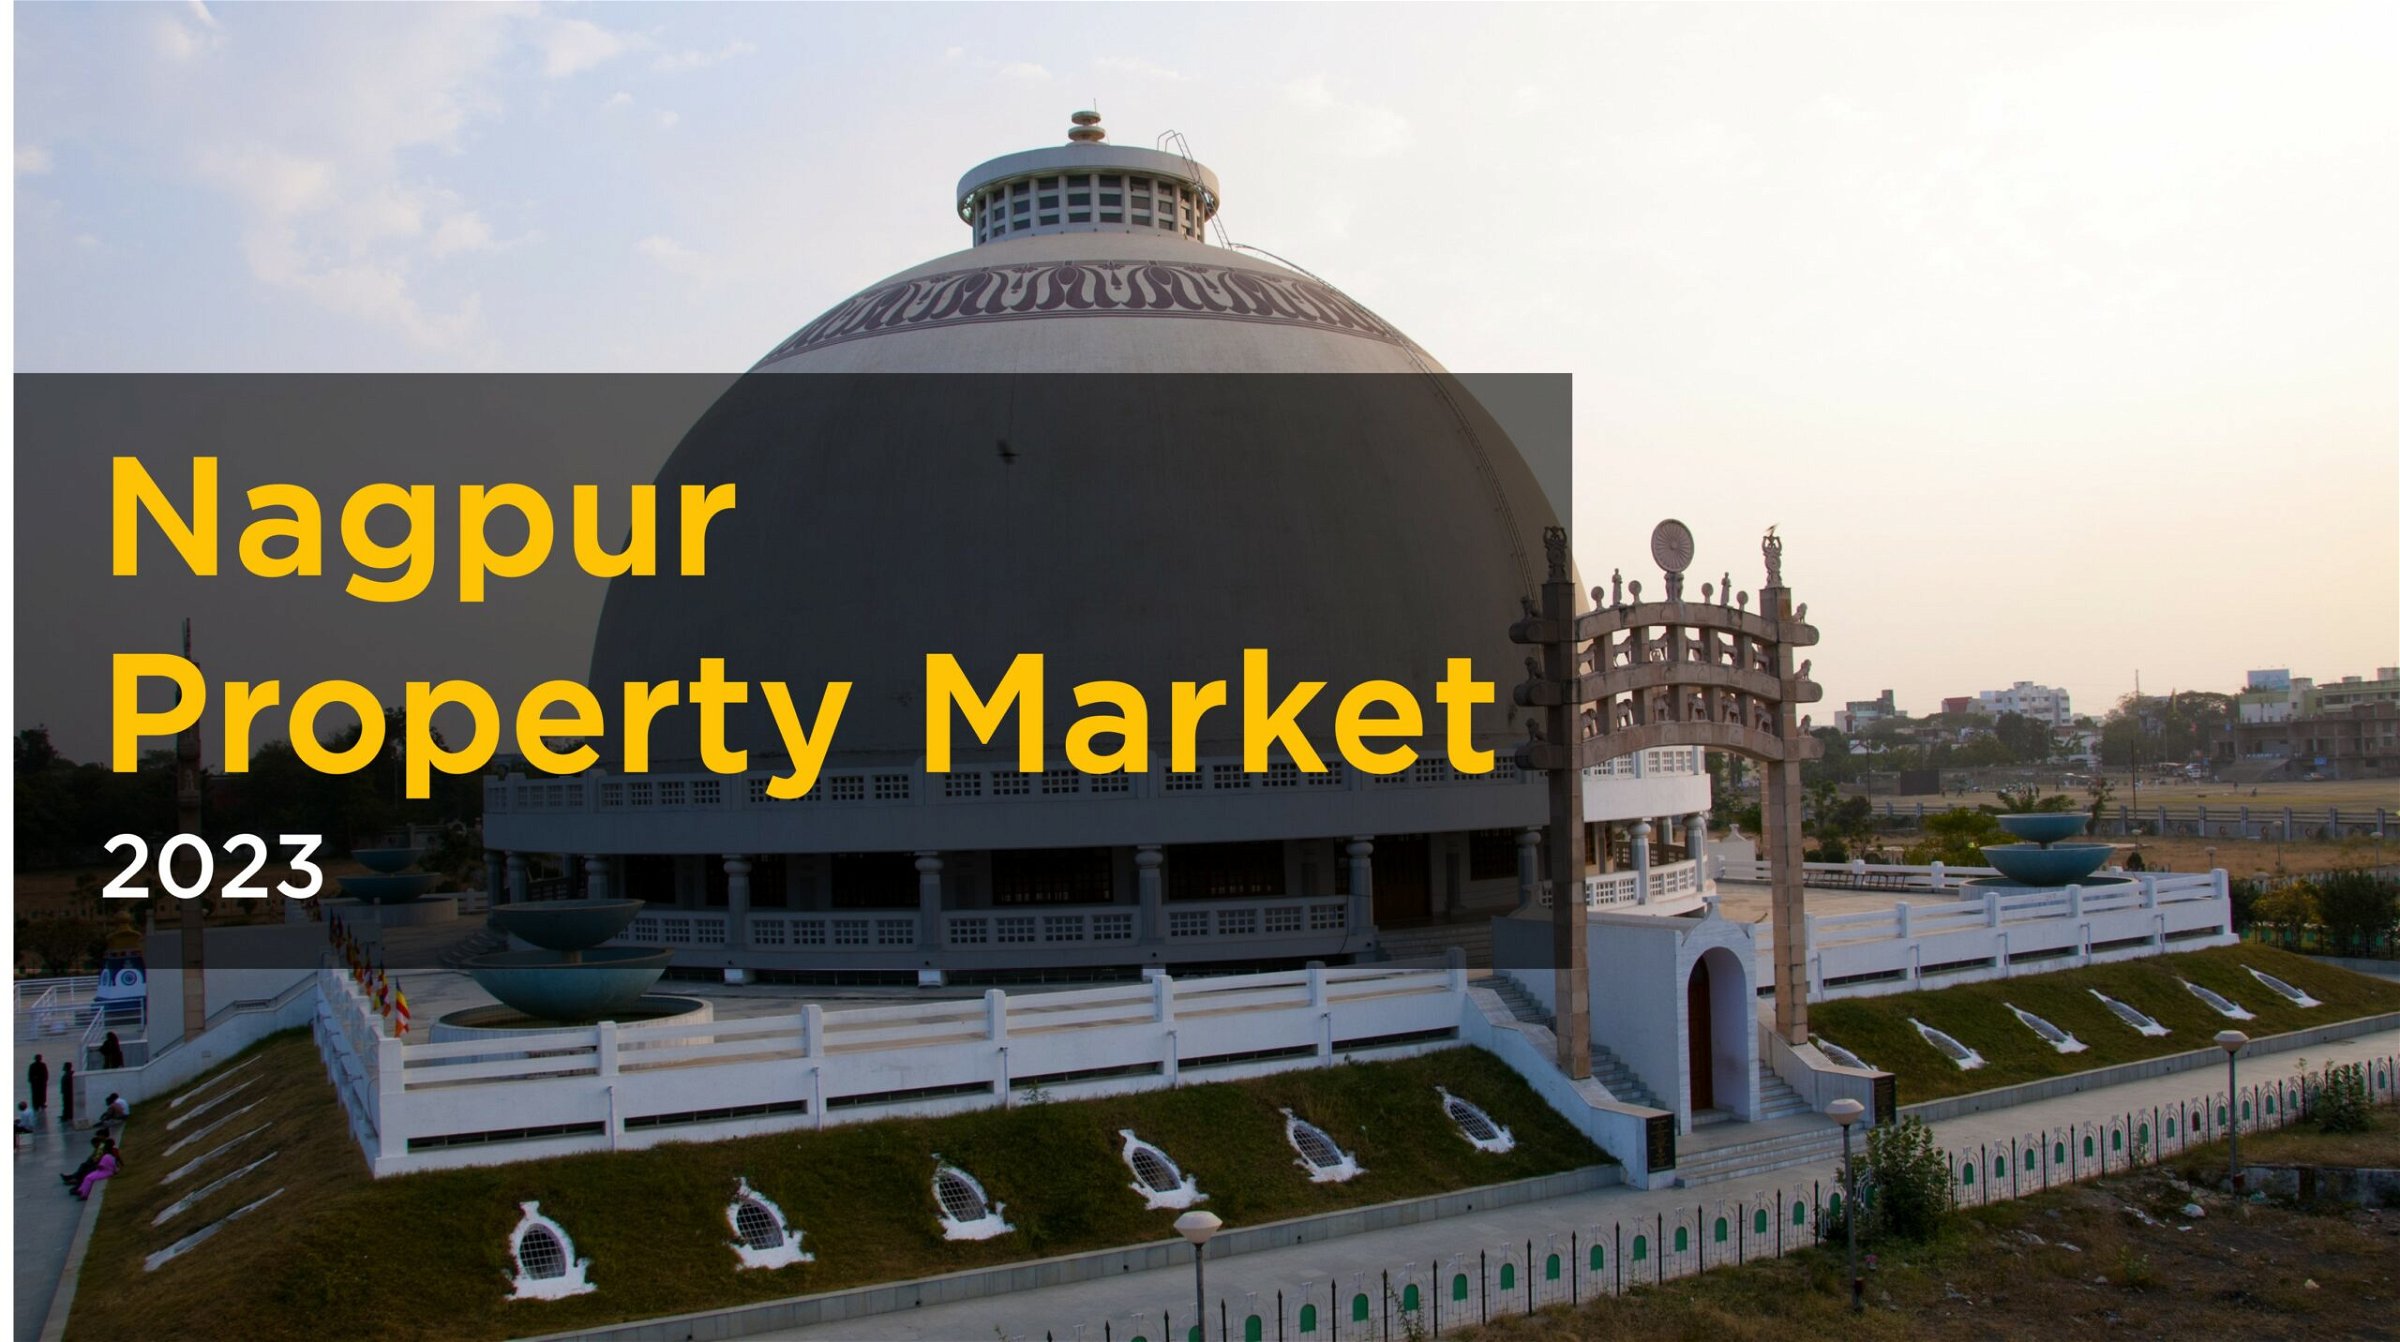 Online property searches surge in Nagpur, takes second spot amongst Central India's key Tier-2 Cities on IRIS index